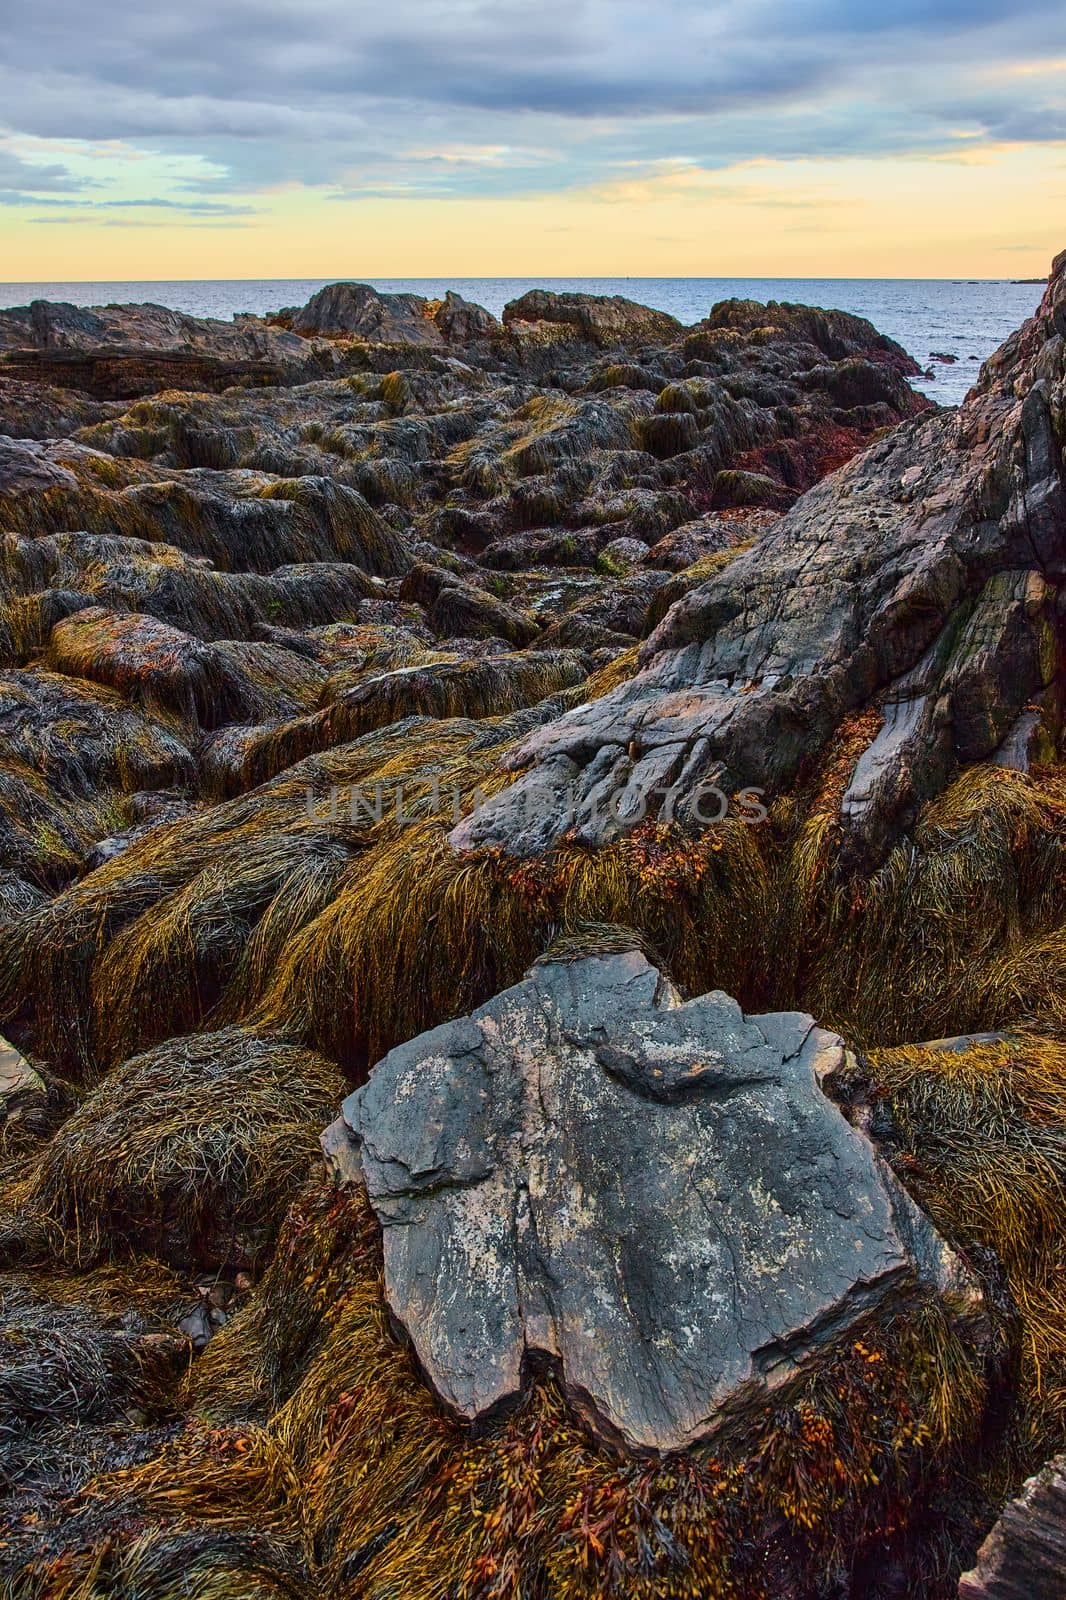 Image of Low tide on Maine coast covered in rocks and wet sea plants by ocean